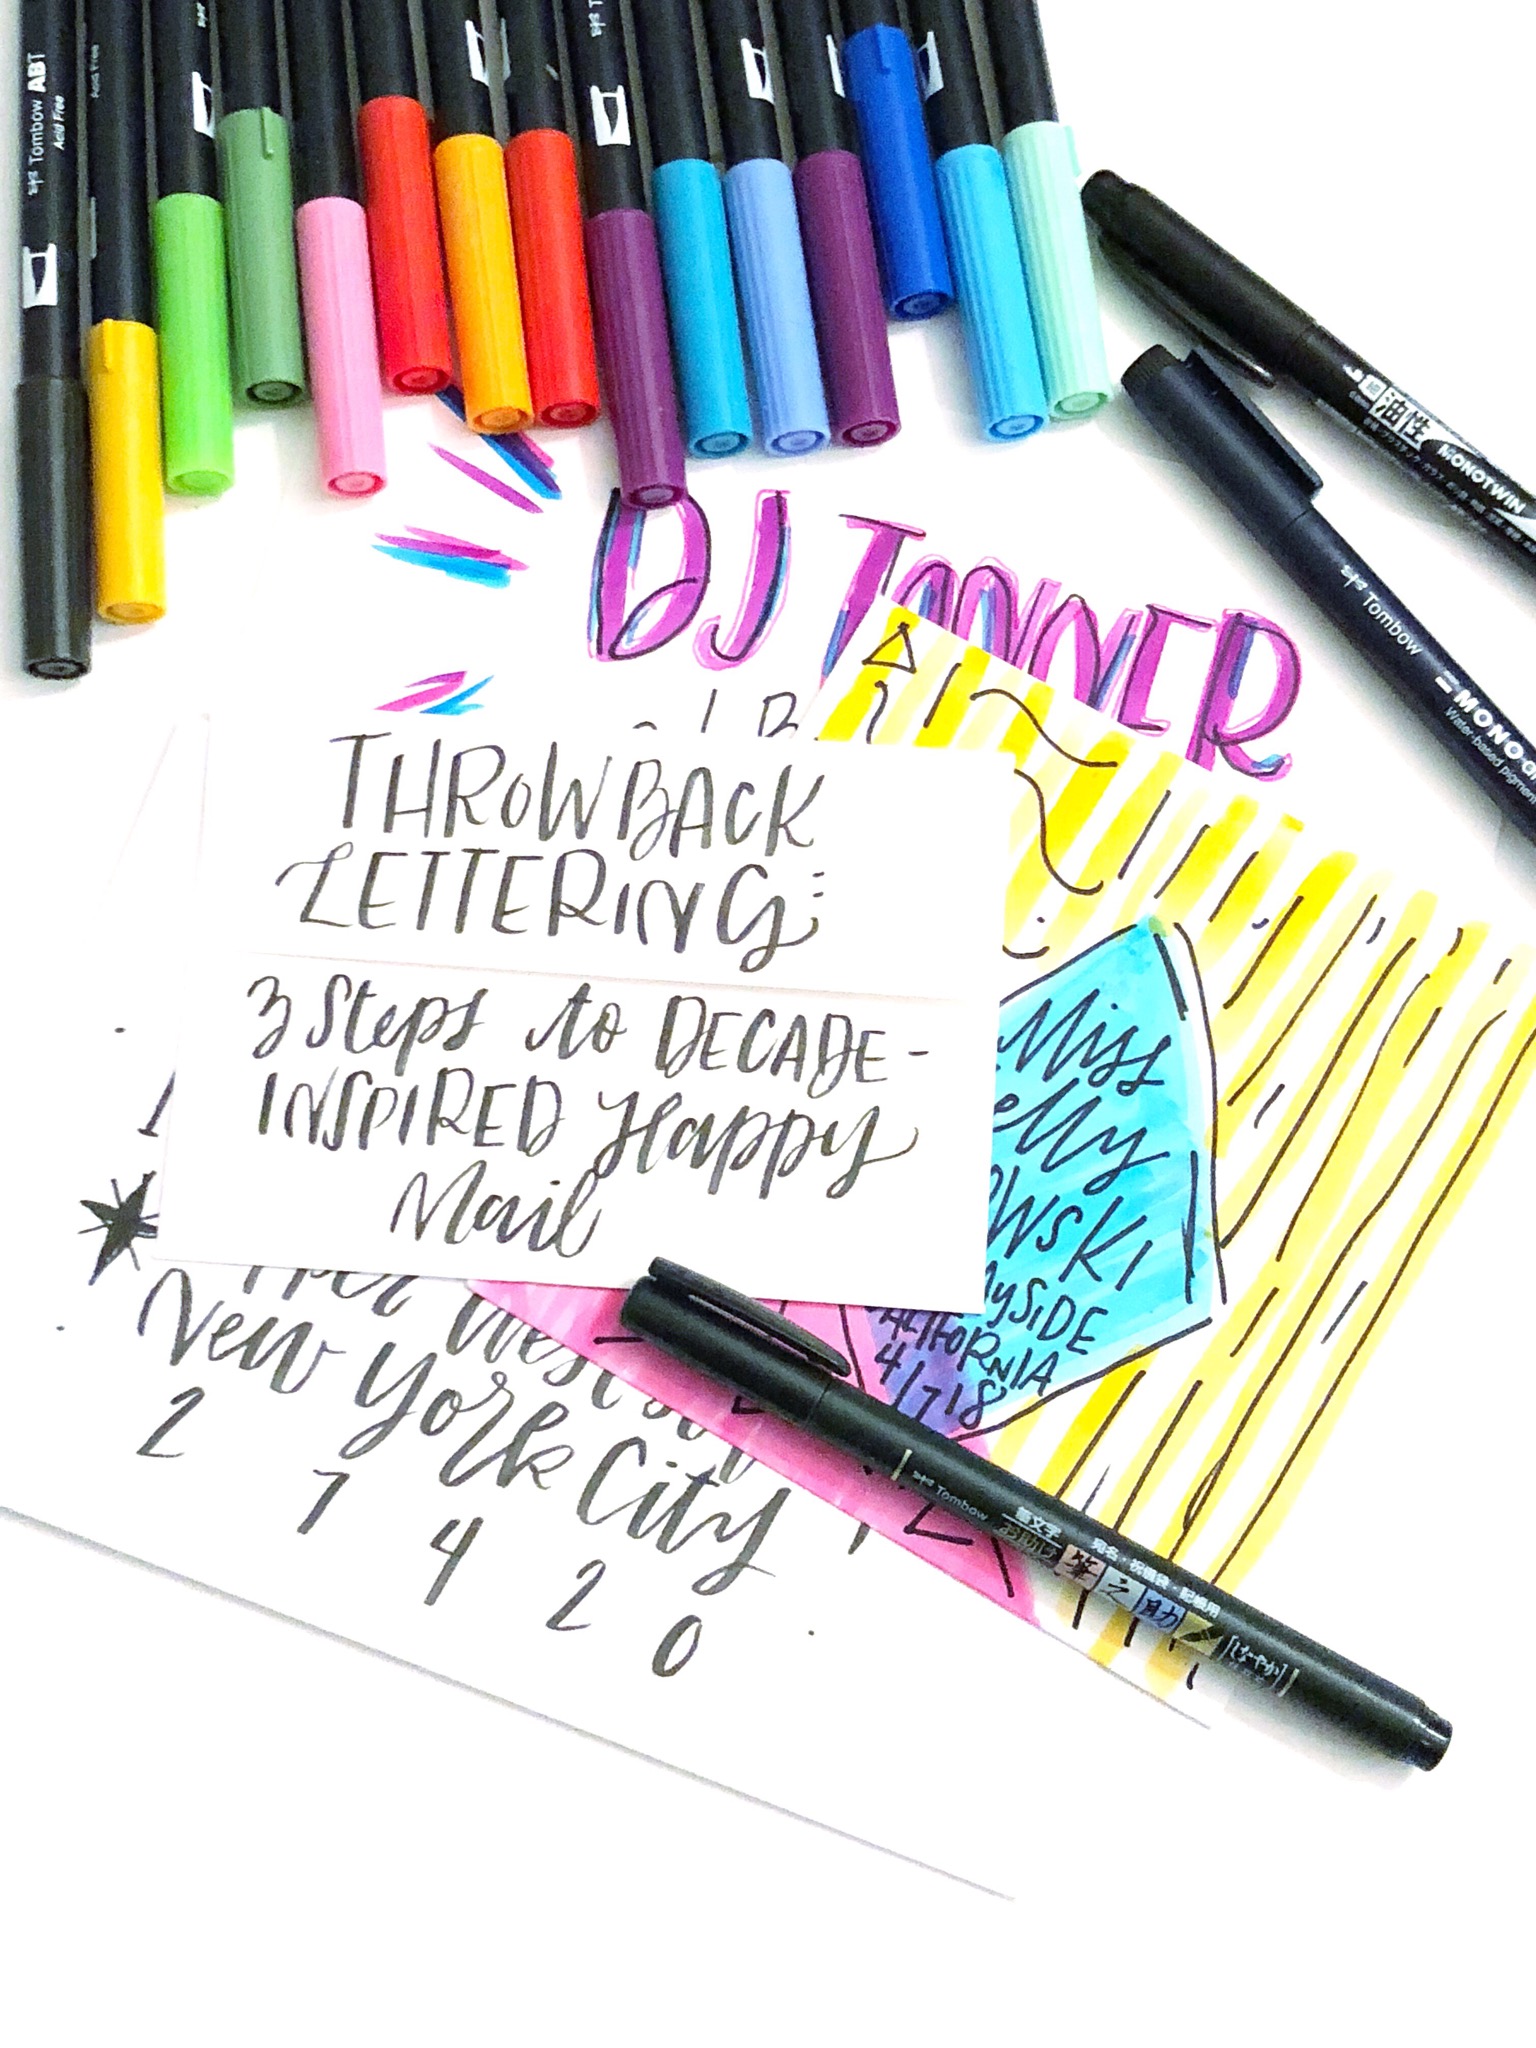 Lauren Fitzmaurice of @renmadecalligraphy shows you three simple steps for creating fun decade-inspired happy mail. Use color, style, and your favorite products from Tombowusa.com to create Handlettered envelopes that will help remind you of the good ole days.